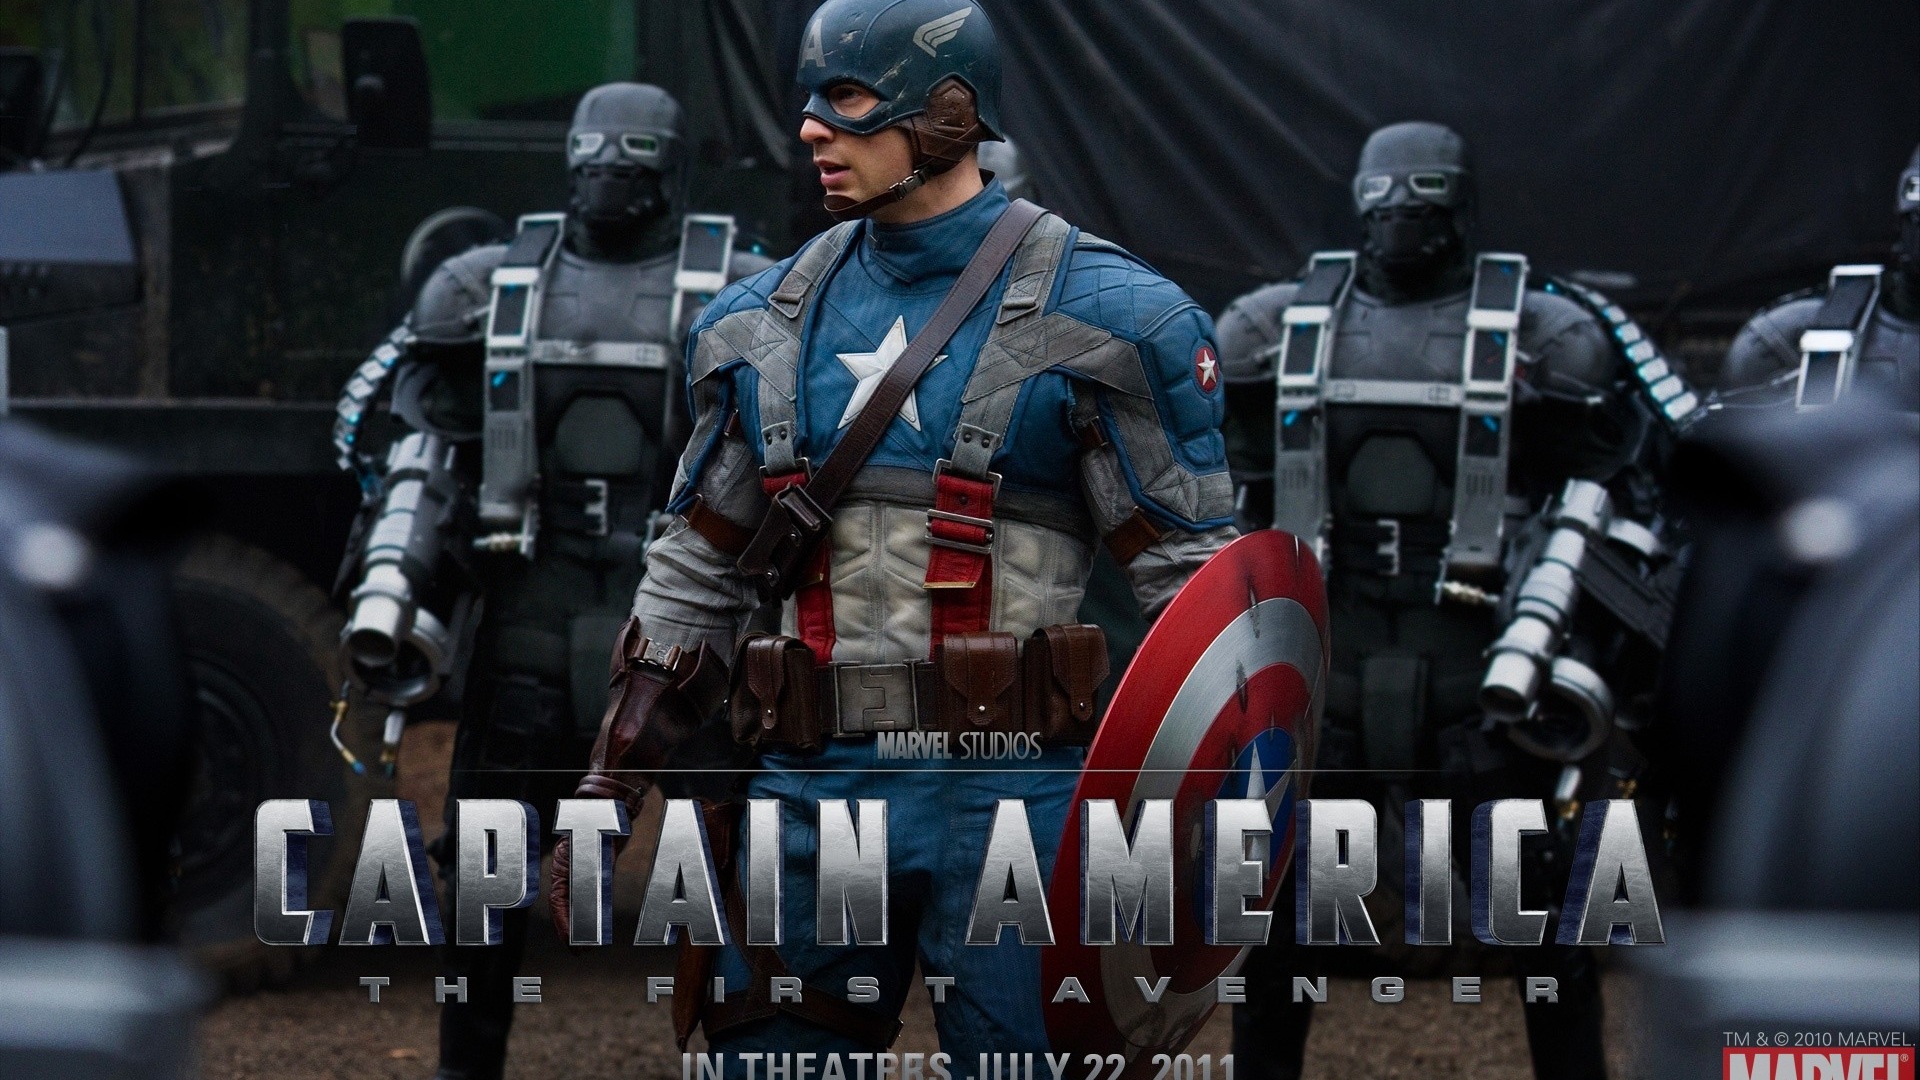  1080 Captain America wallpaper image and choose Set as Background